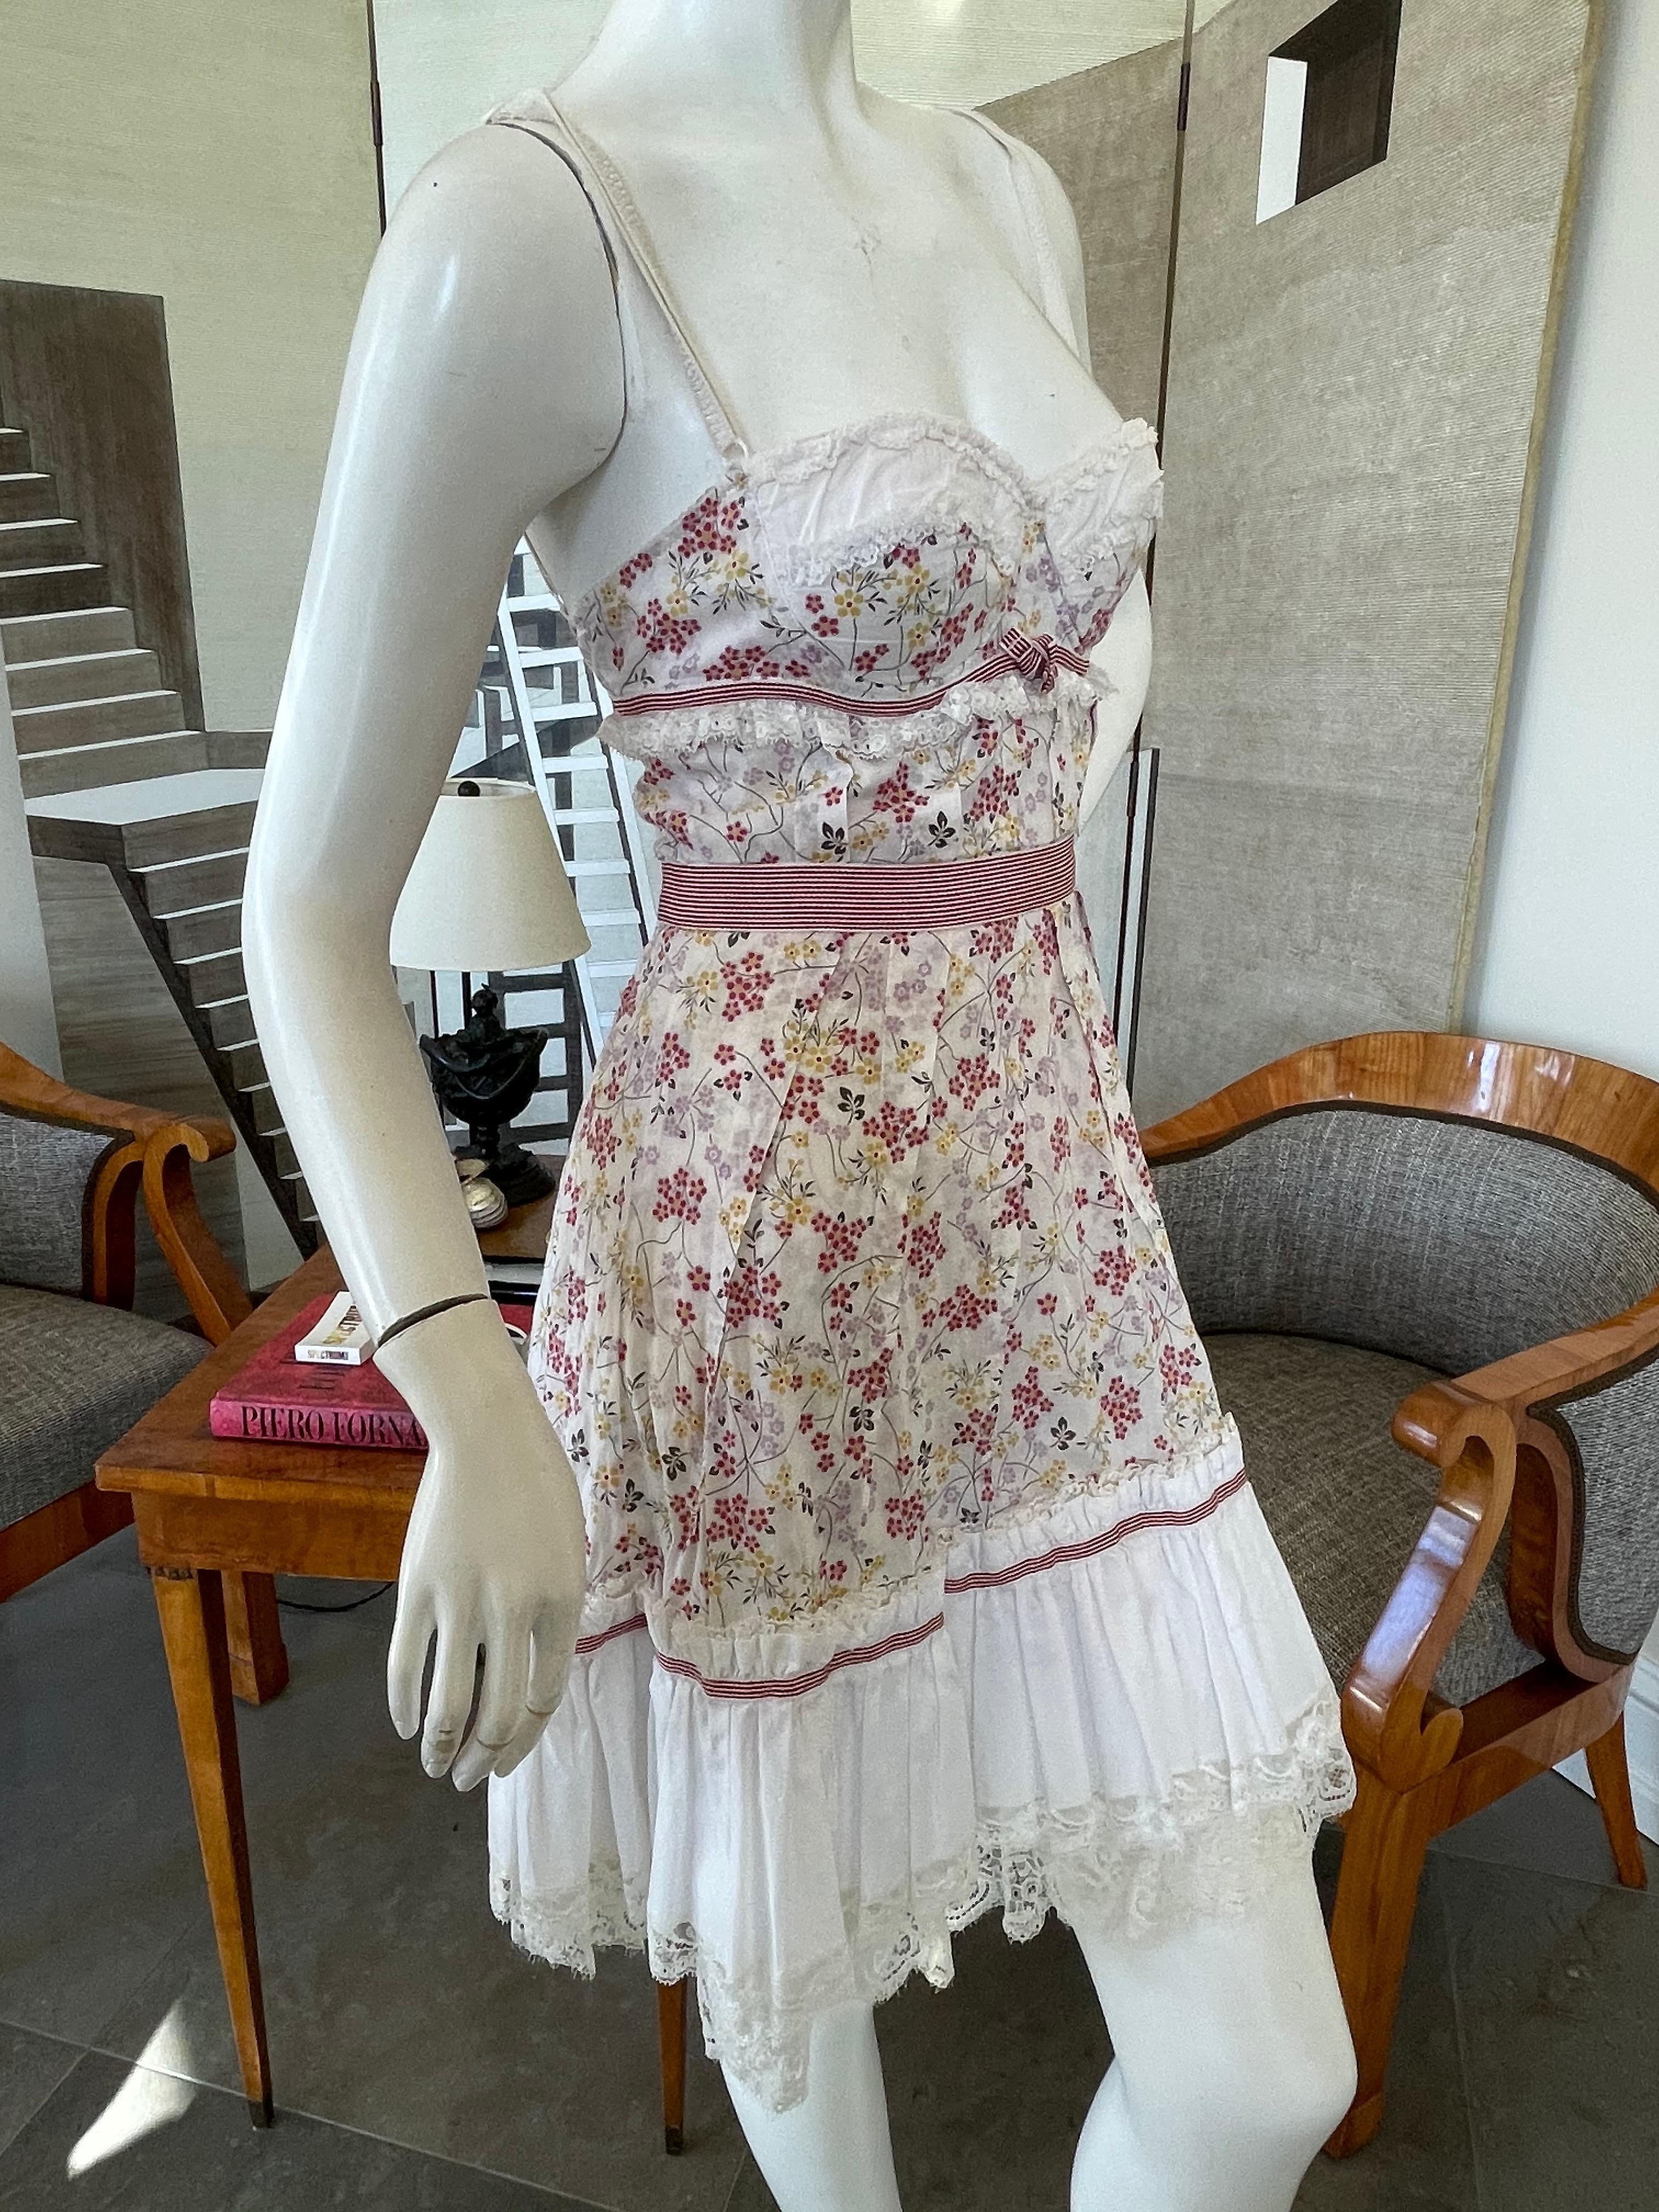 Dolce & Gabbana D&G Pink Lace Trim Floral Dress with Underwire Bra In New Condition For Sale In Cloverdale, CA